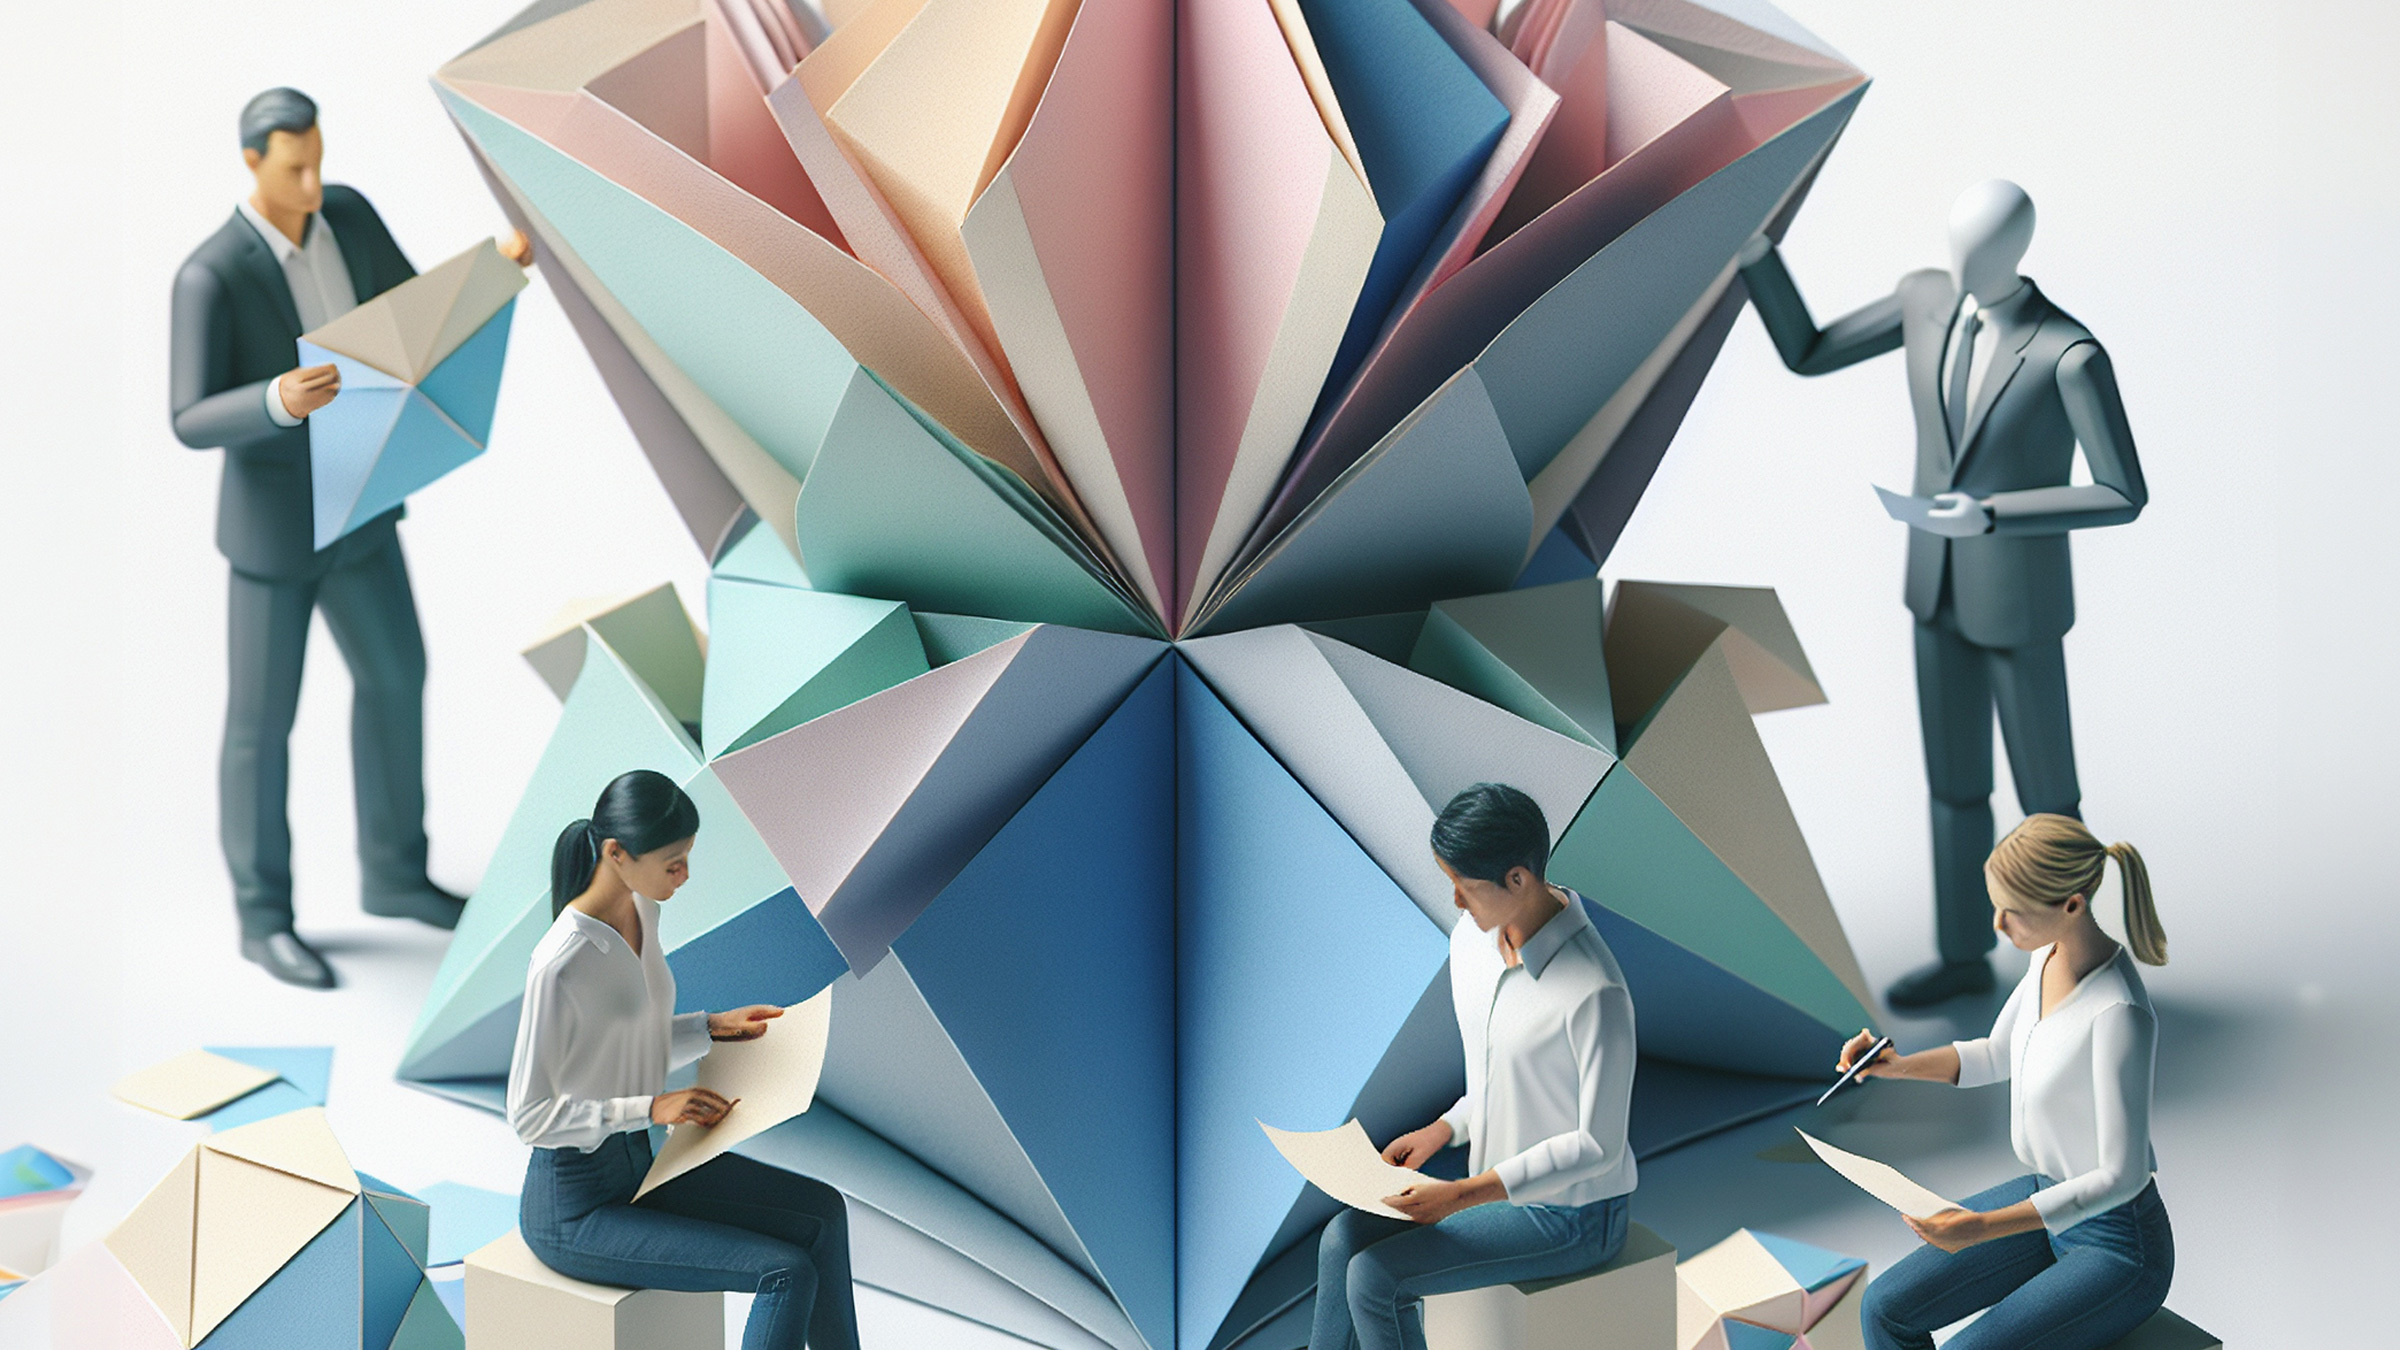 giant origami art surrounded by sitting and standing workers, illustration